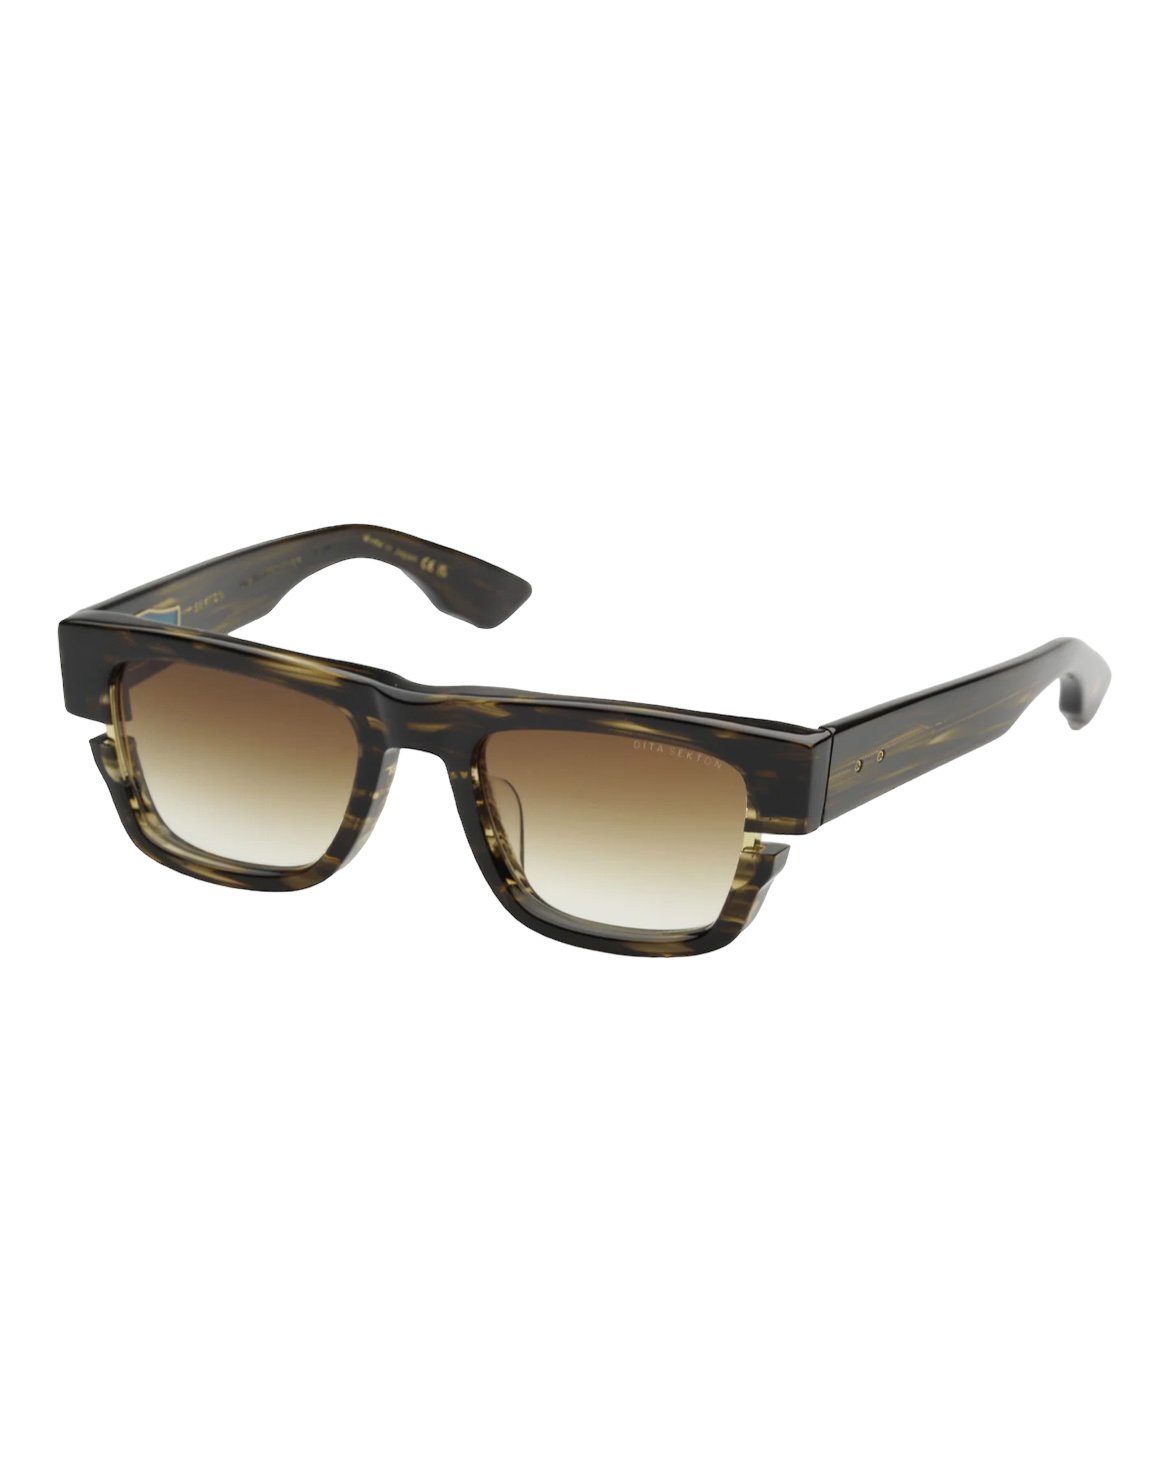 A pair of DITA sunglasses with brown lenses and a tortoise frame.